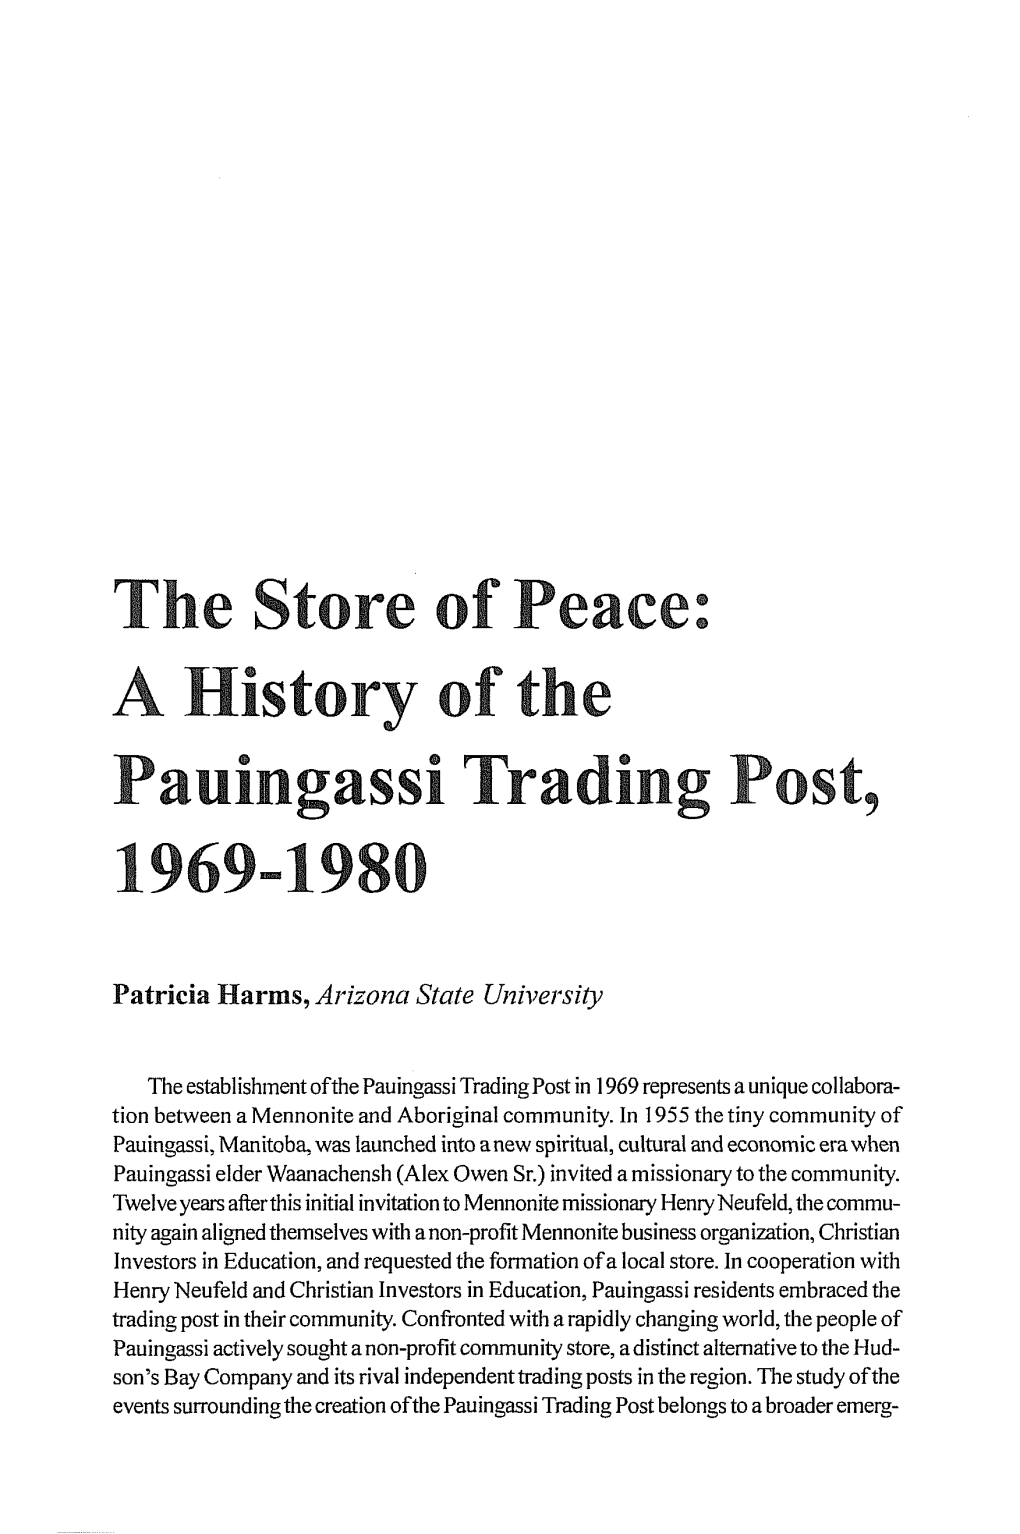 A History of the Pauingassi Trading Post, 11969-11980